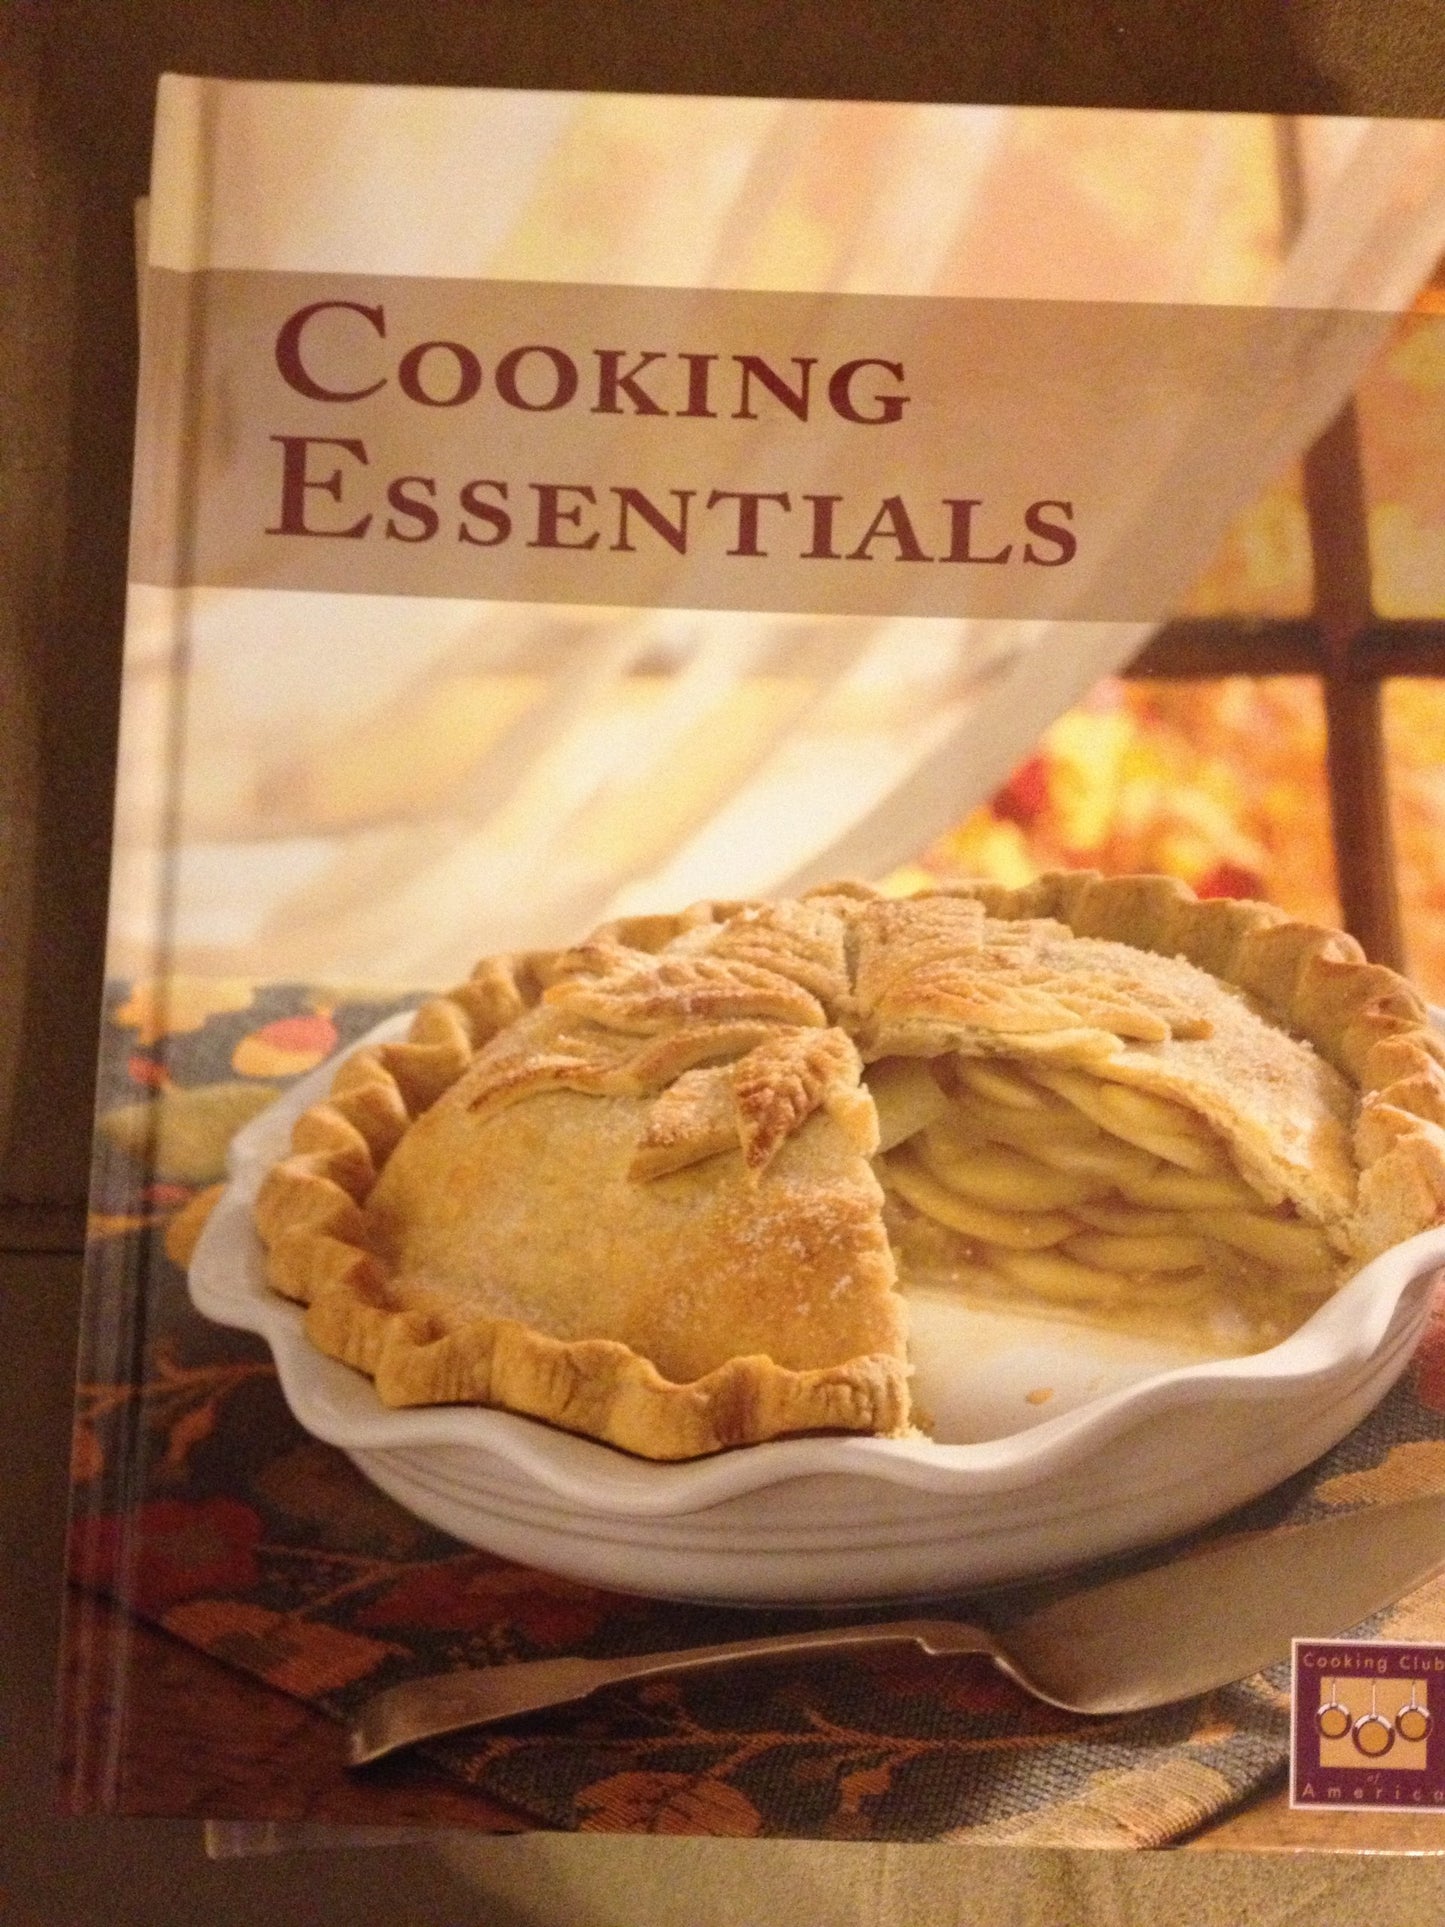 Cooking Essentials (Cooking Arts Collection)